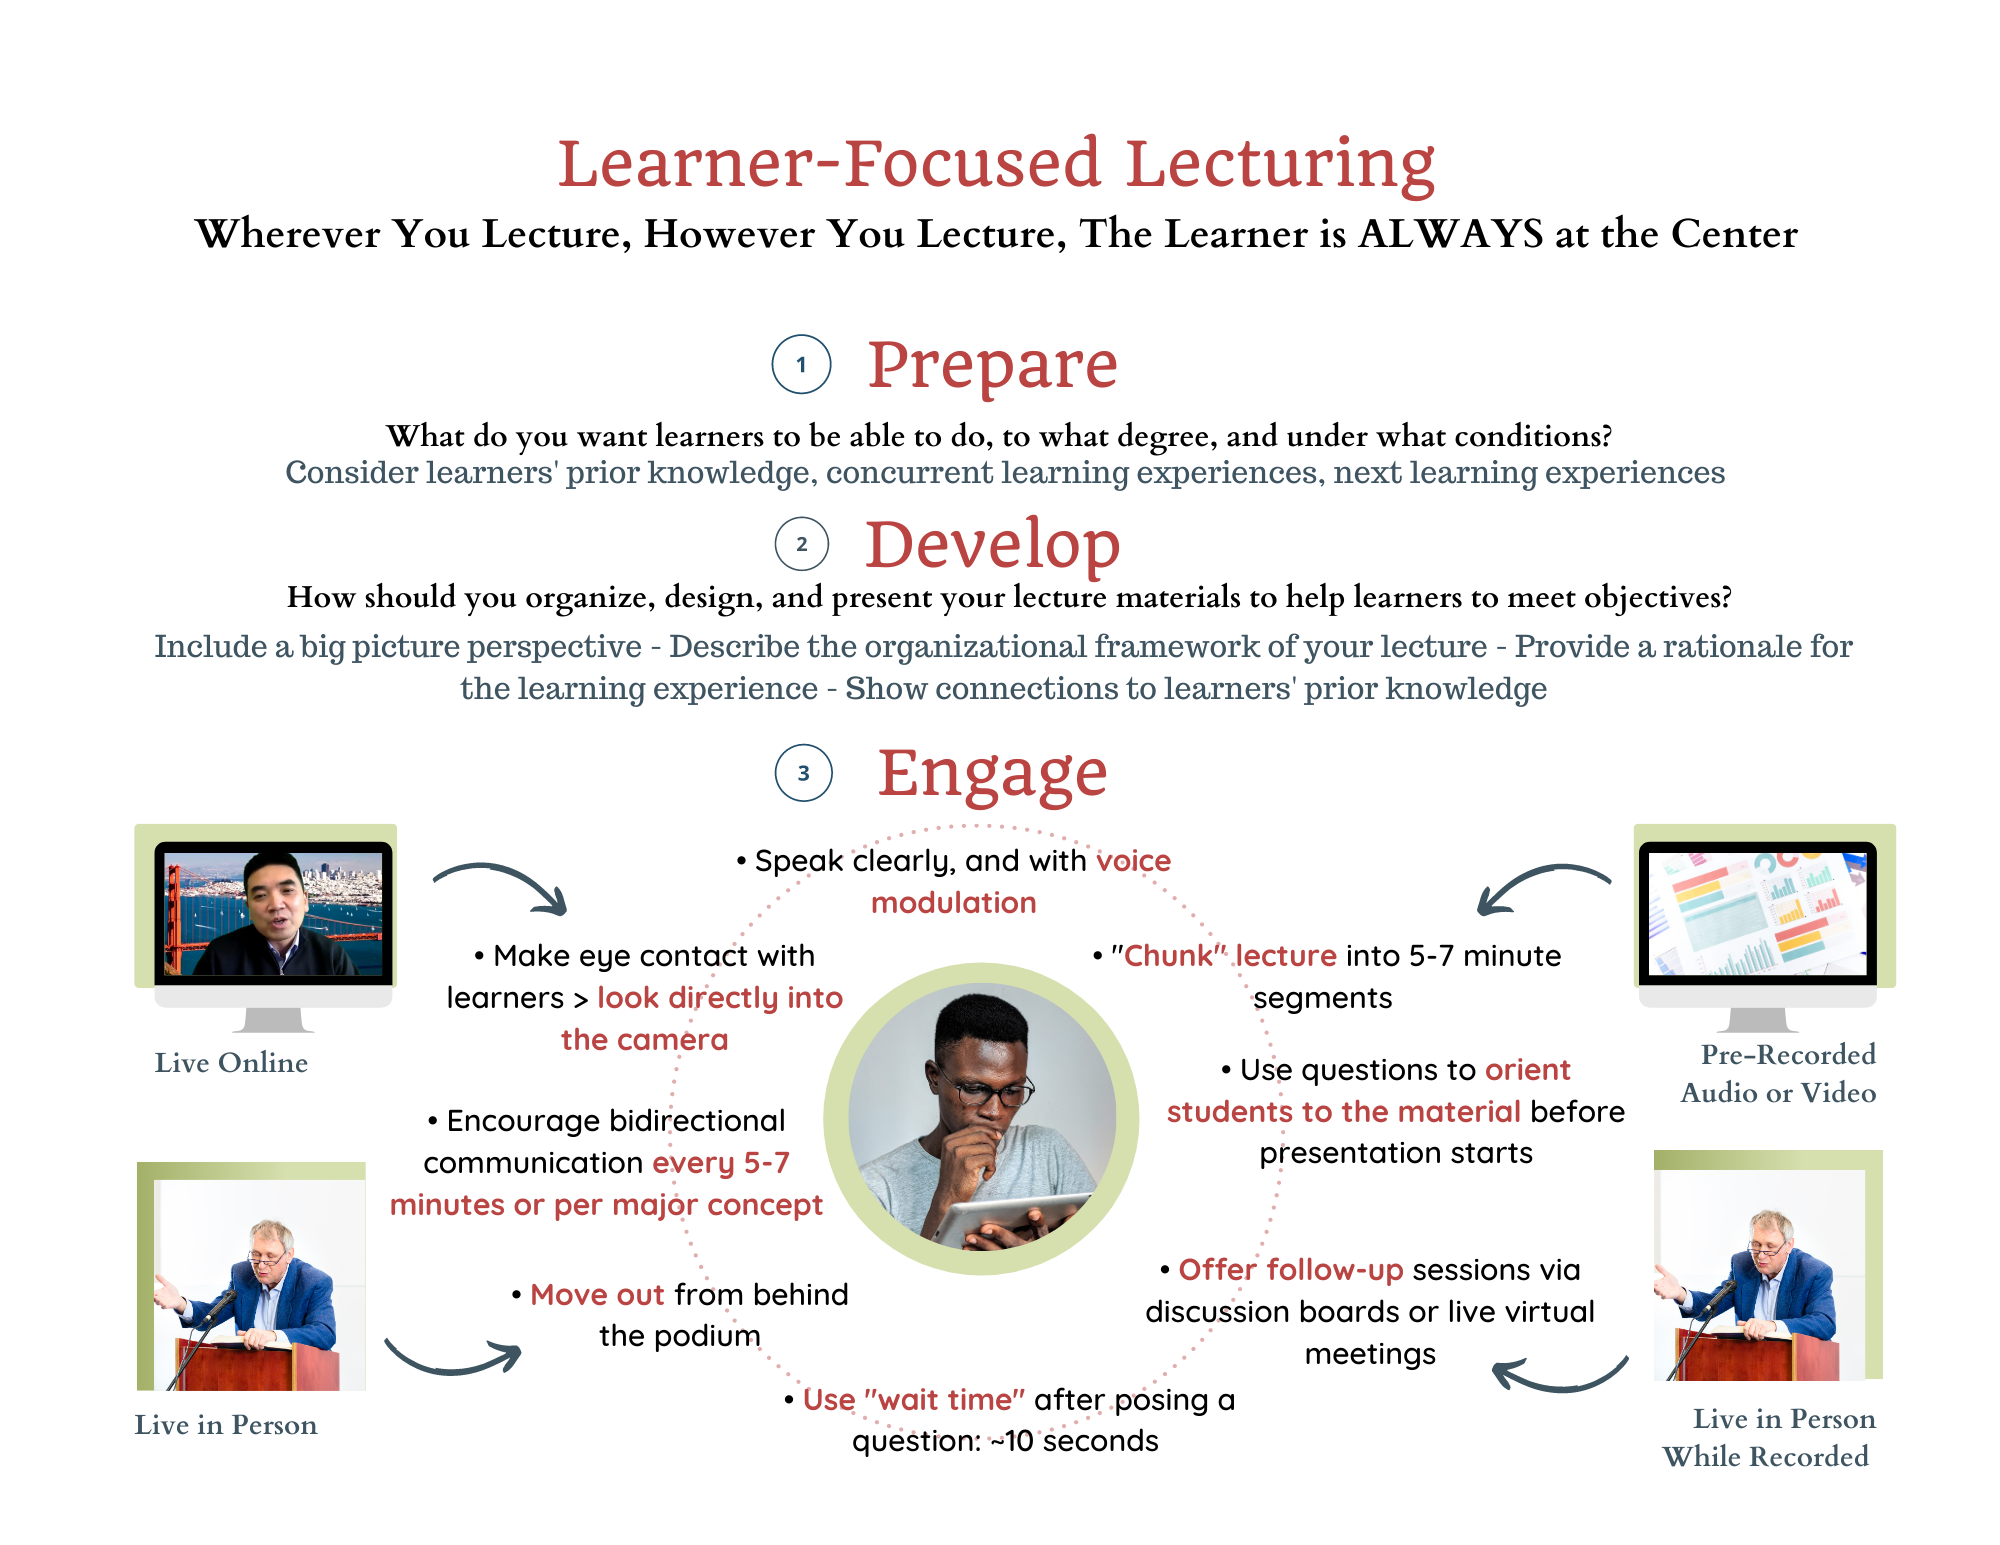 See Learner-Focused Lecturing section above